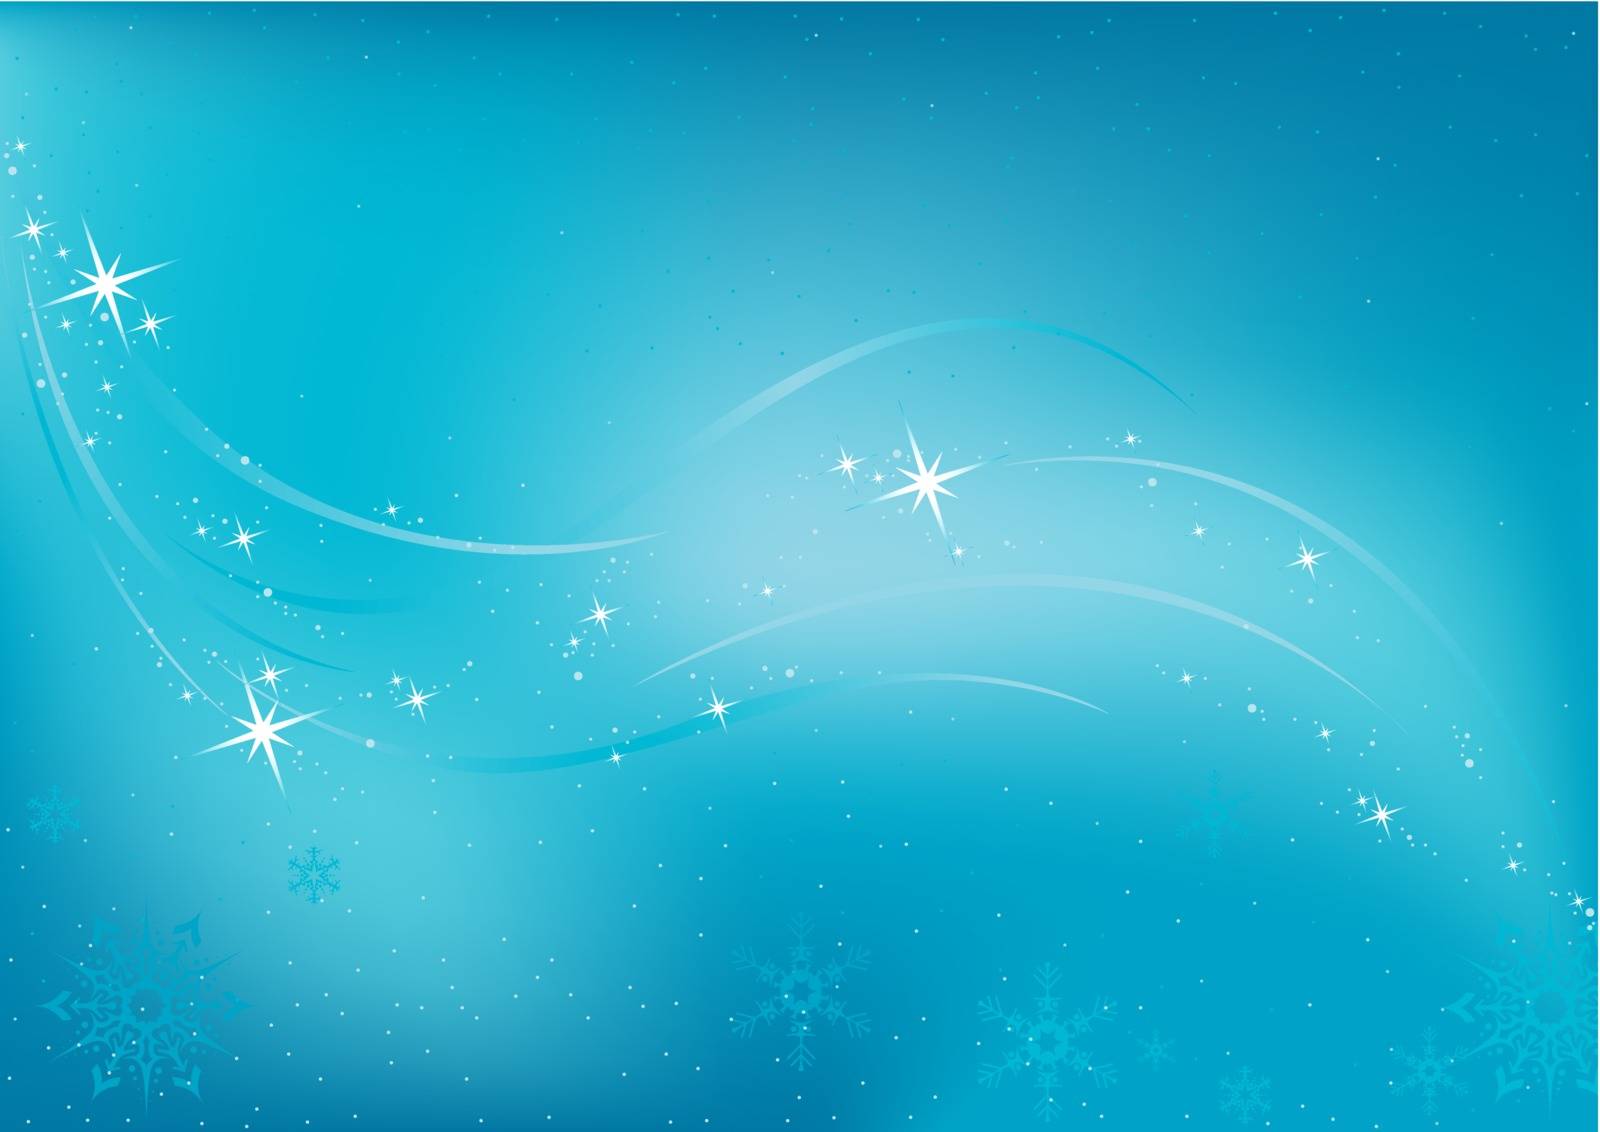 Frozen Background - Colored Abstract Illustration, Vector